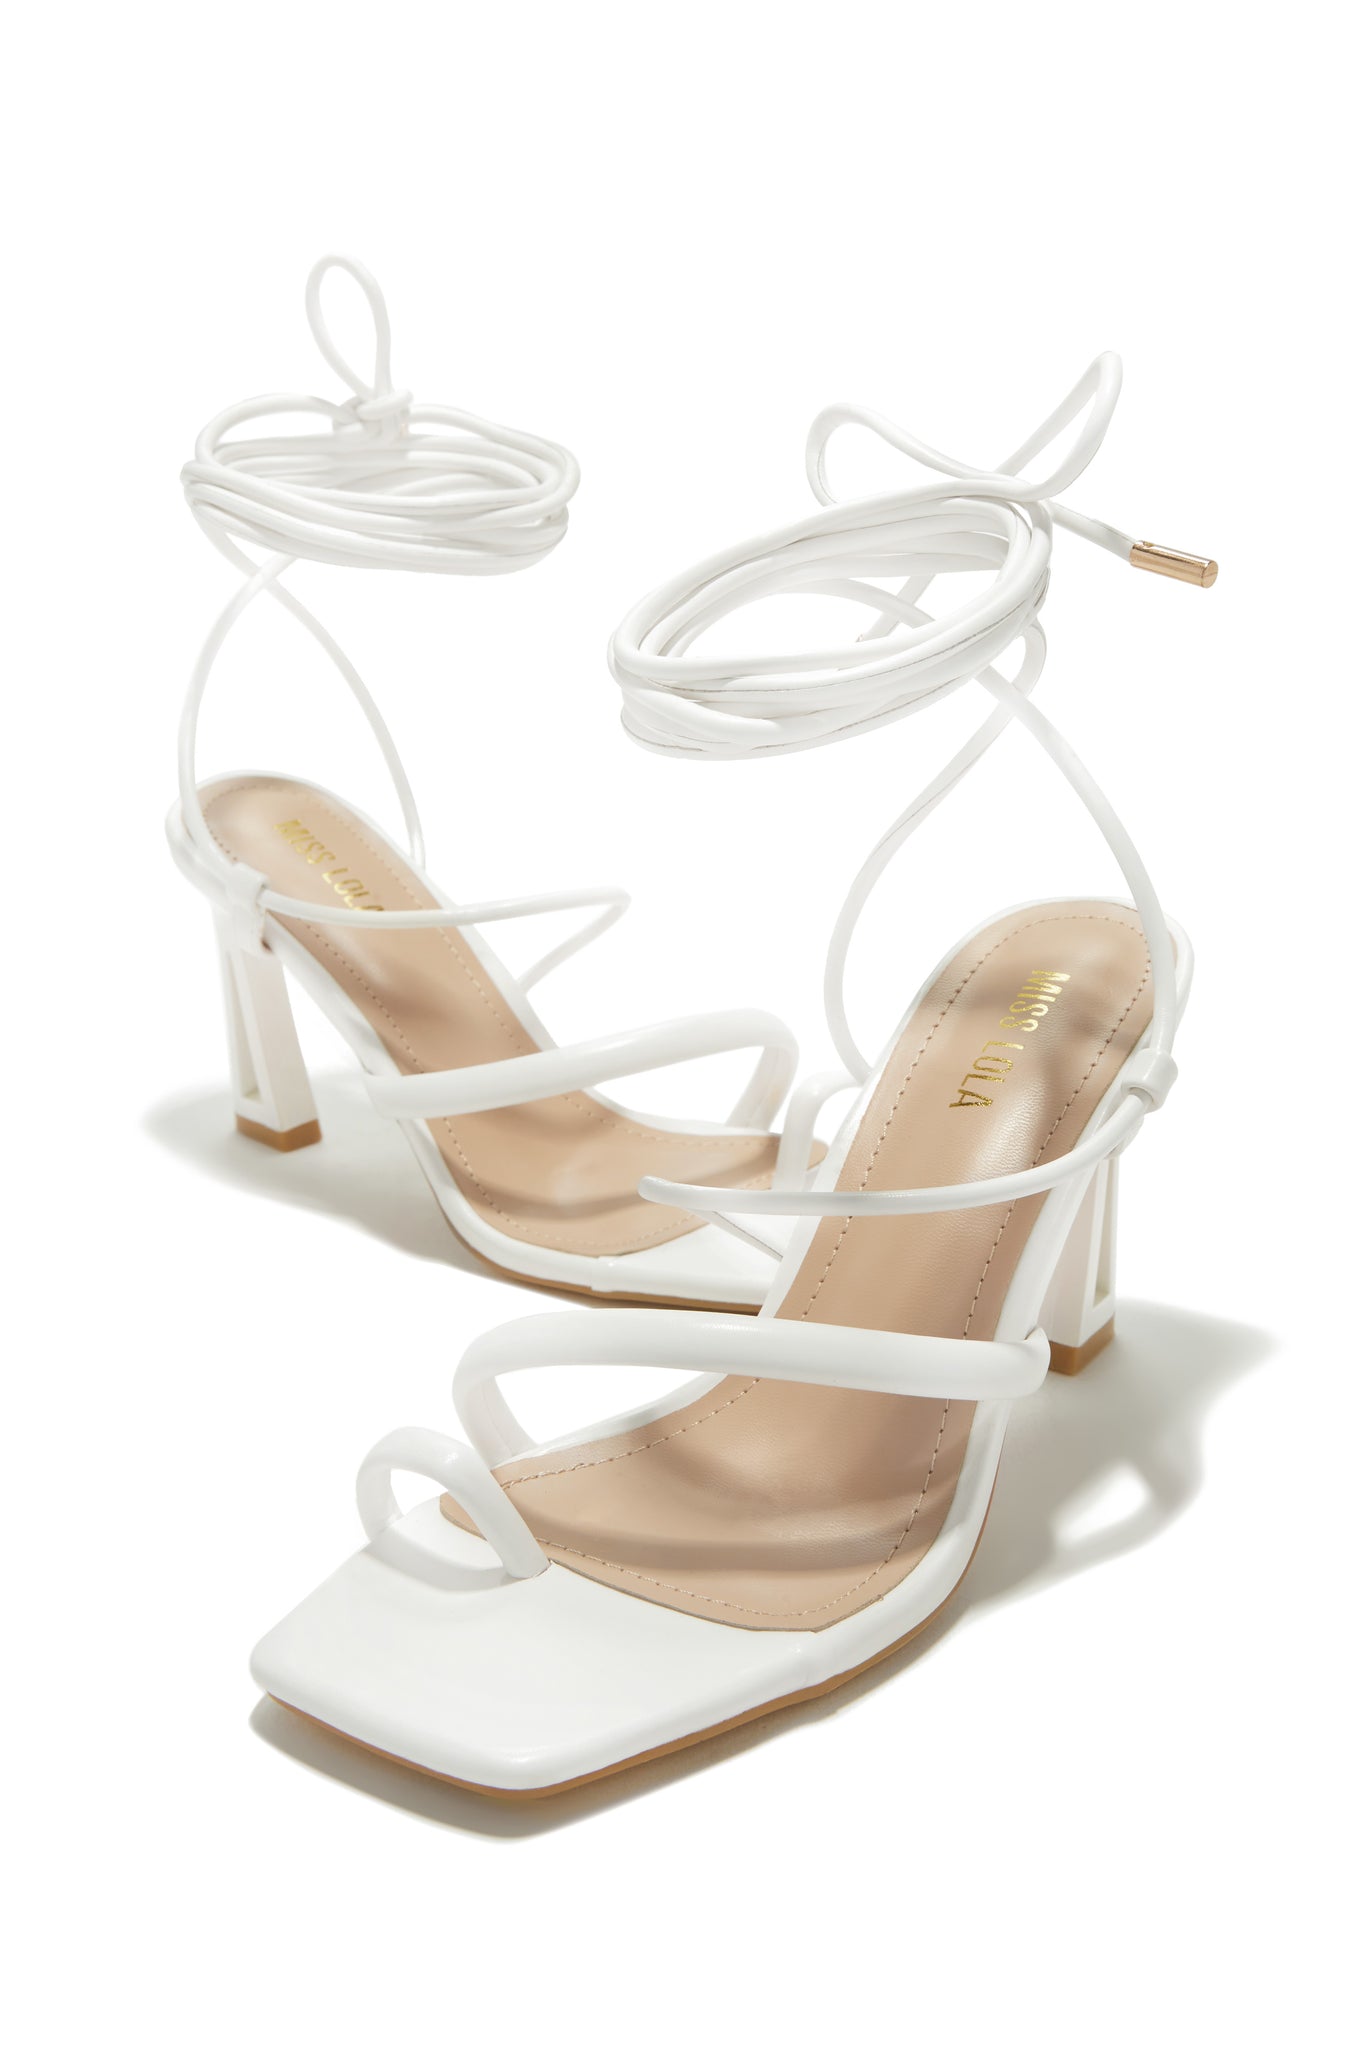 Dreamyy White Square Toe Ankle Strap High Heel Sandals